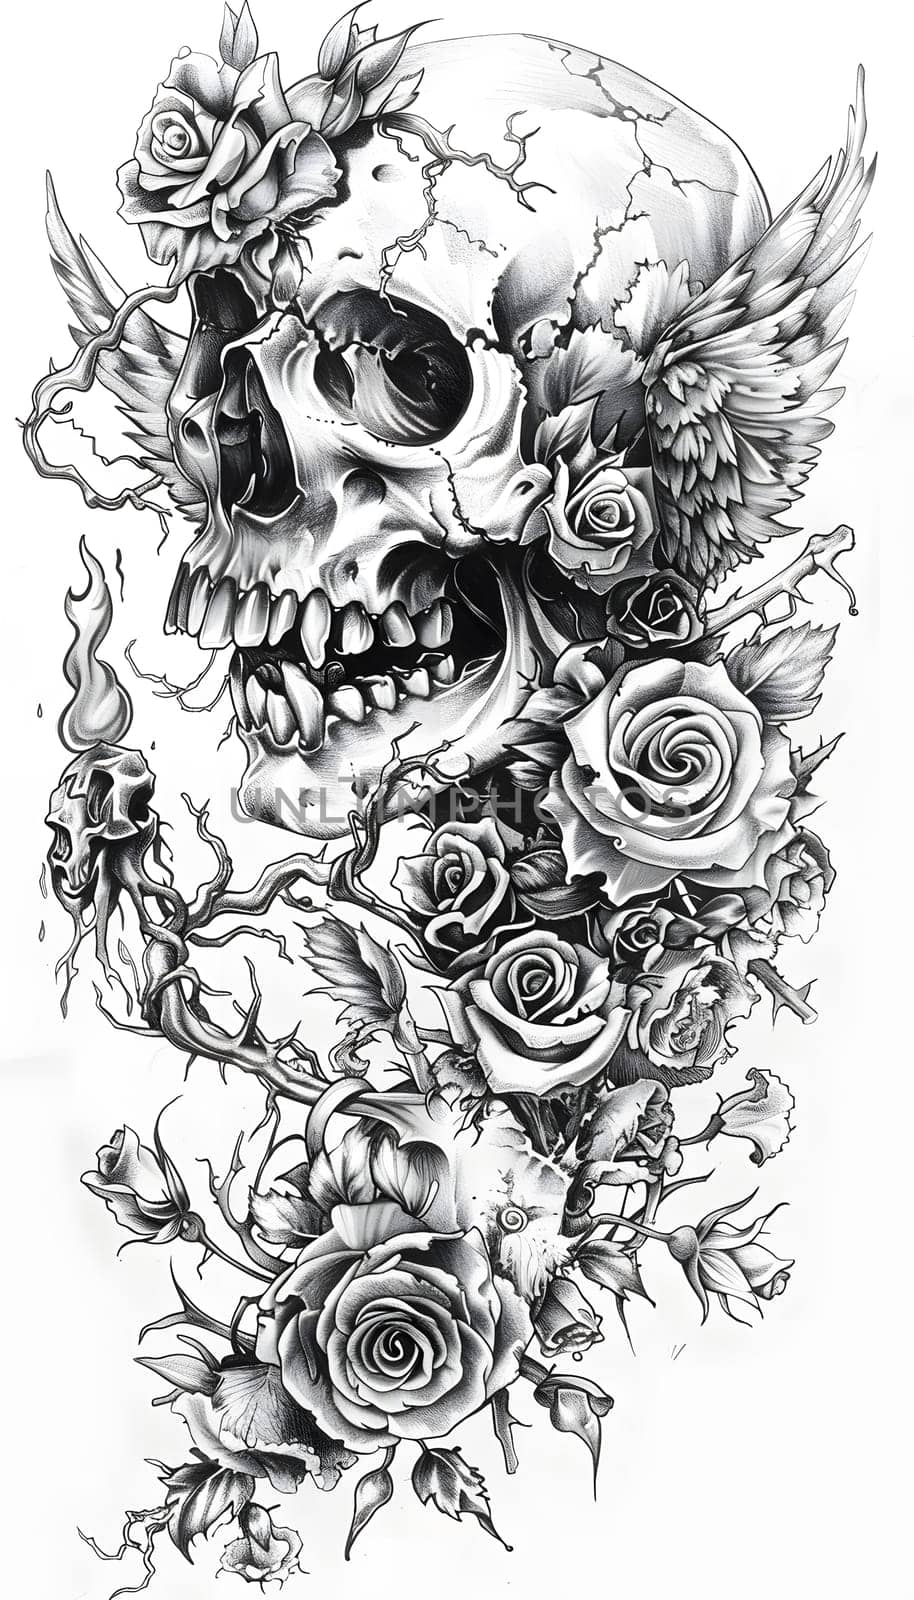 An intricate black and white drawing of a skull adorned with roses and wings, a powerful gesture symbolizing life and death, beautifully combining art and nature in a floral pattern